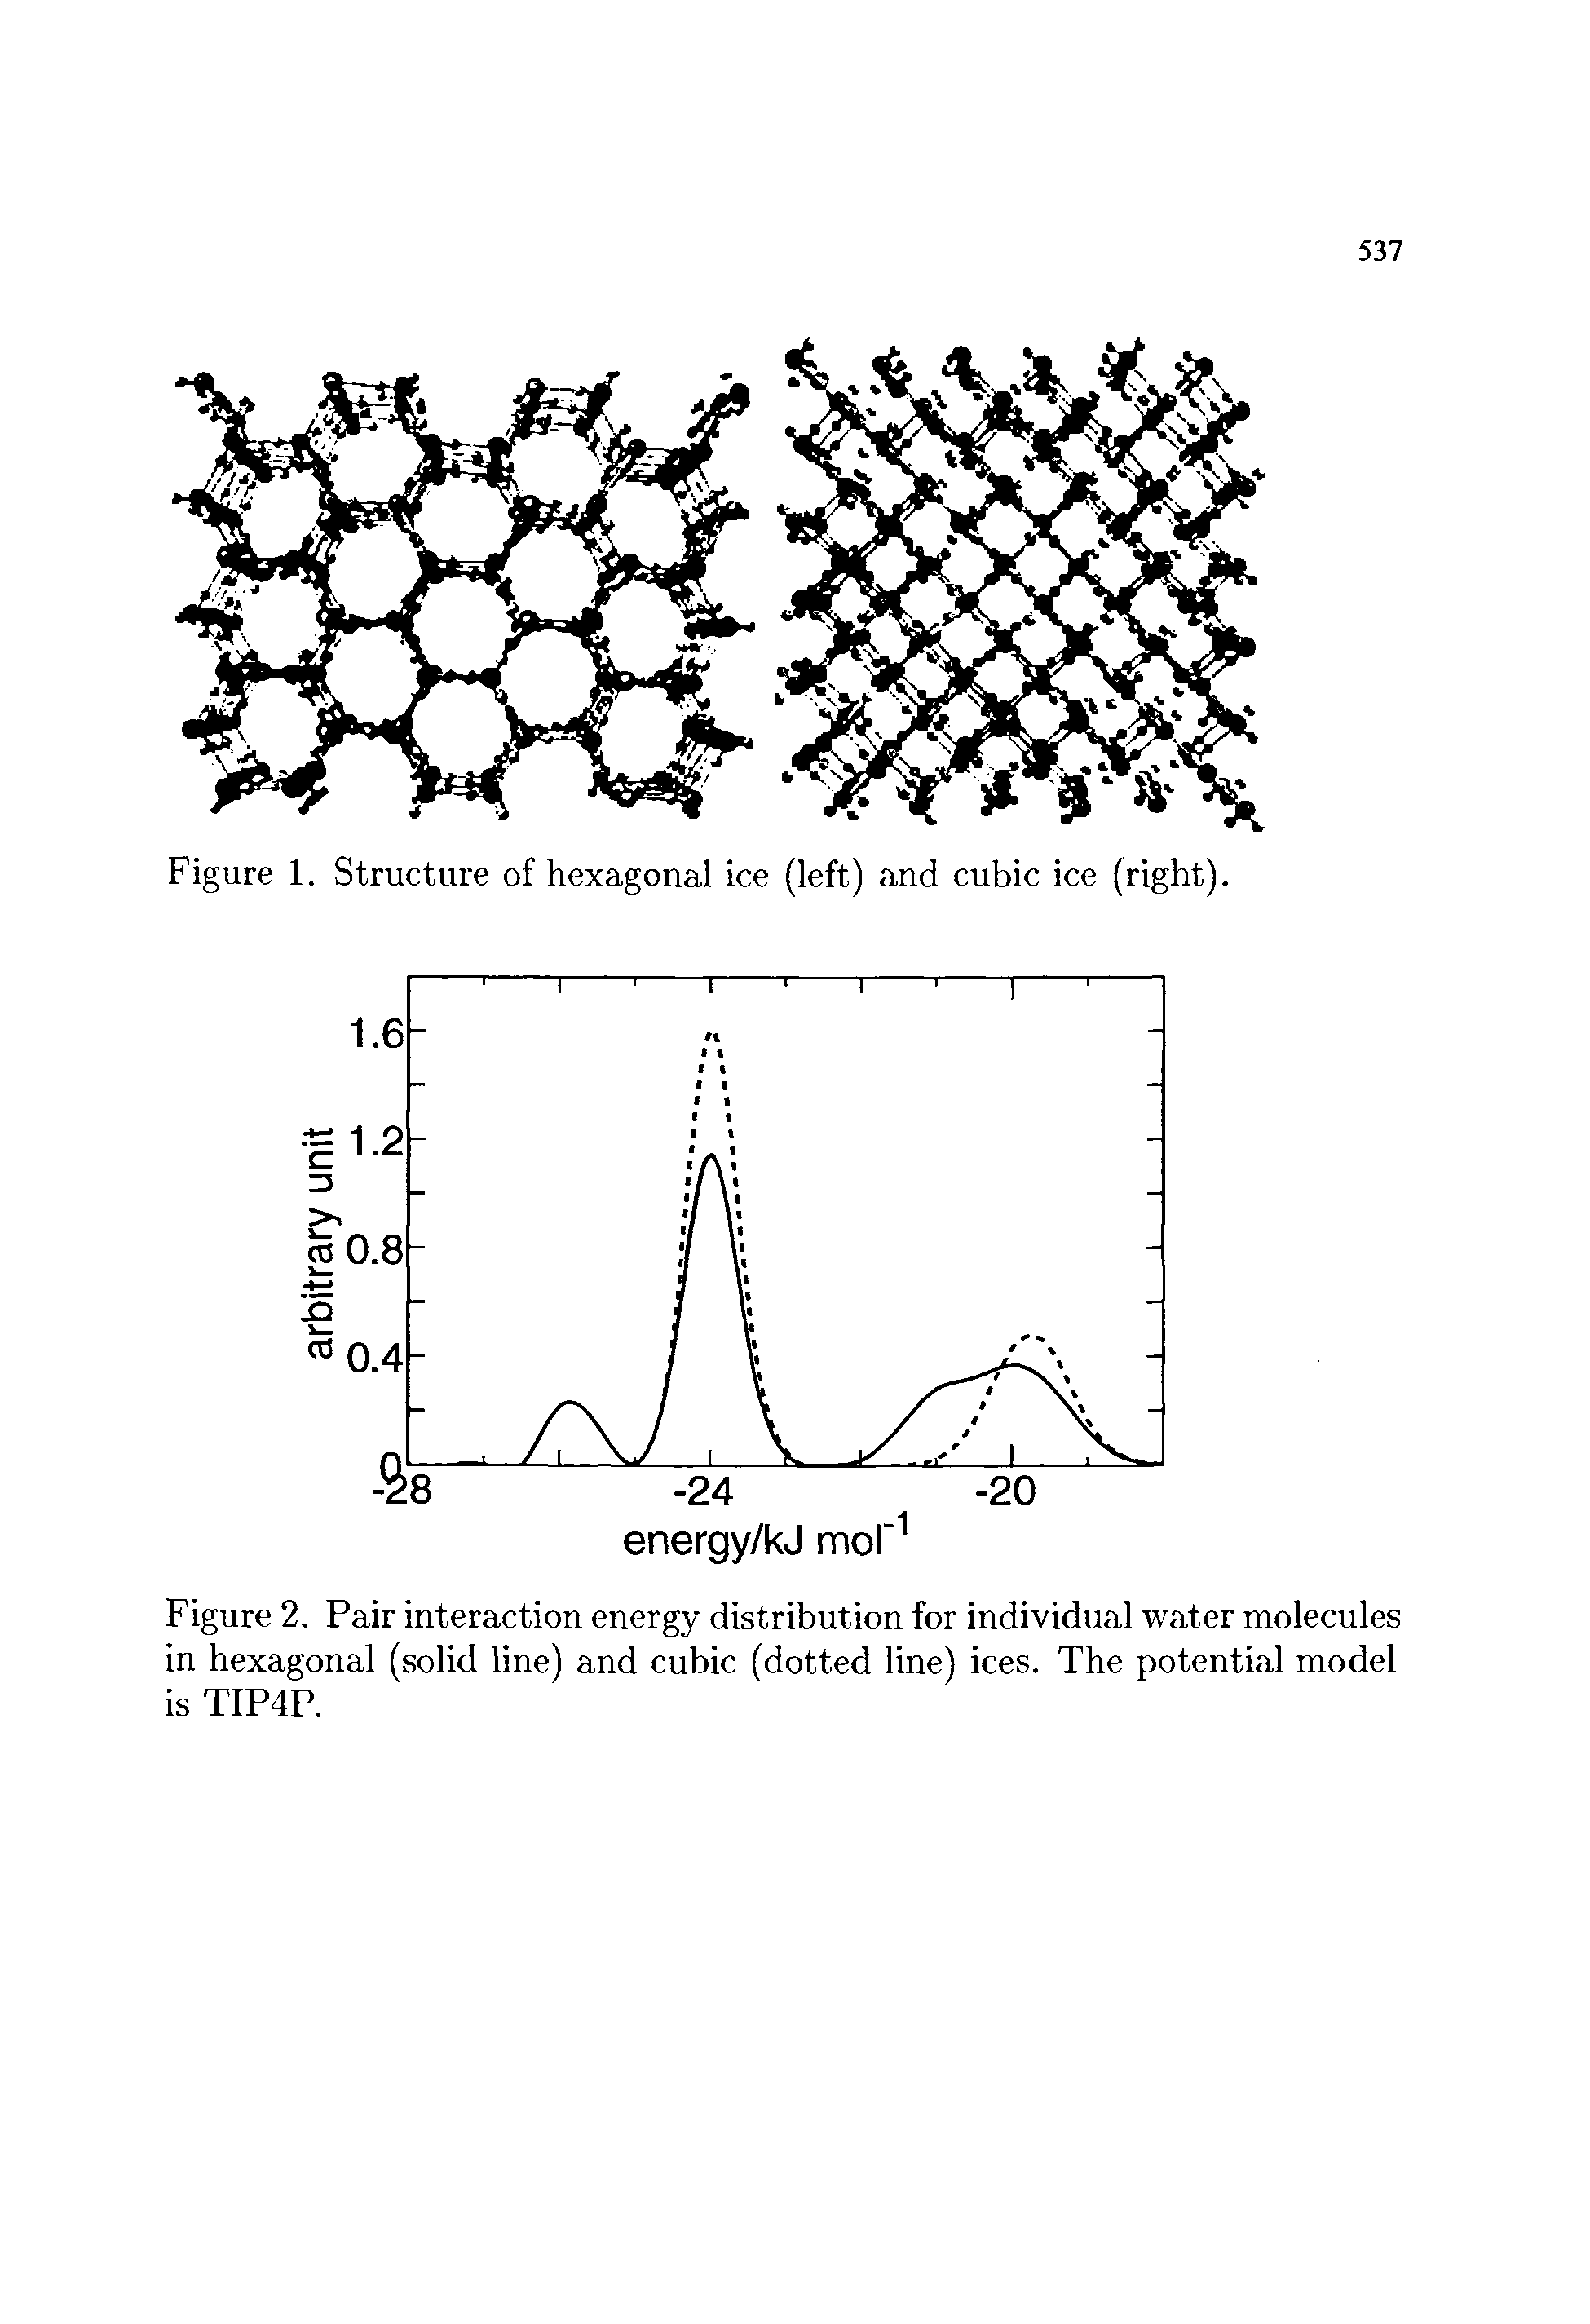 Figure 2. Pair interaction energy distribution for individual water molecules in hexagonal (solid line) and cubic (dotted line) ices. The potential model is TIP4P.